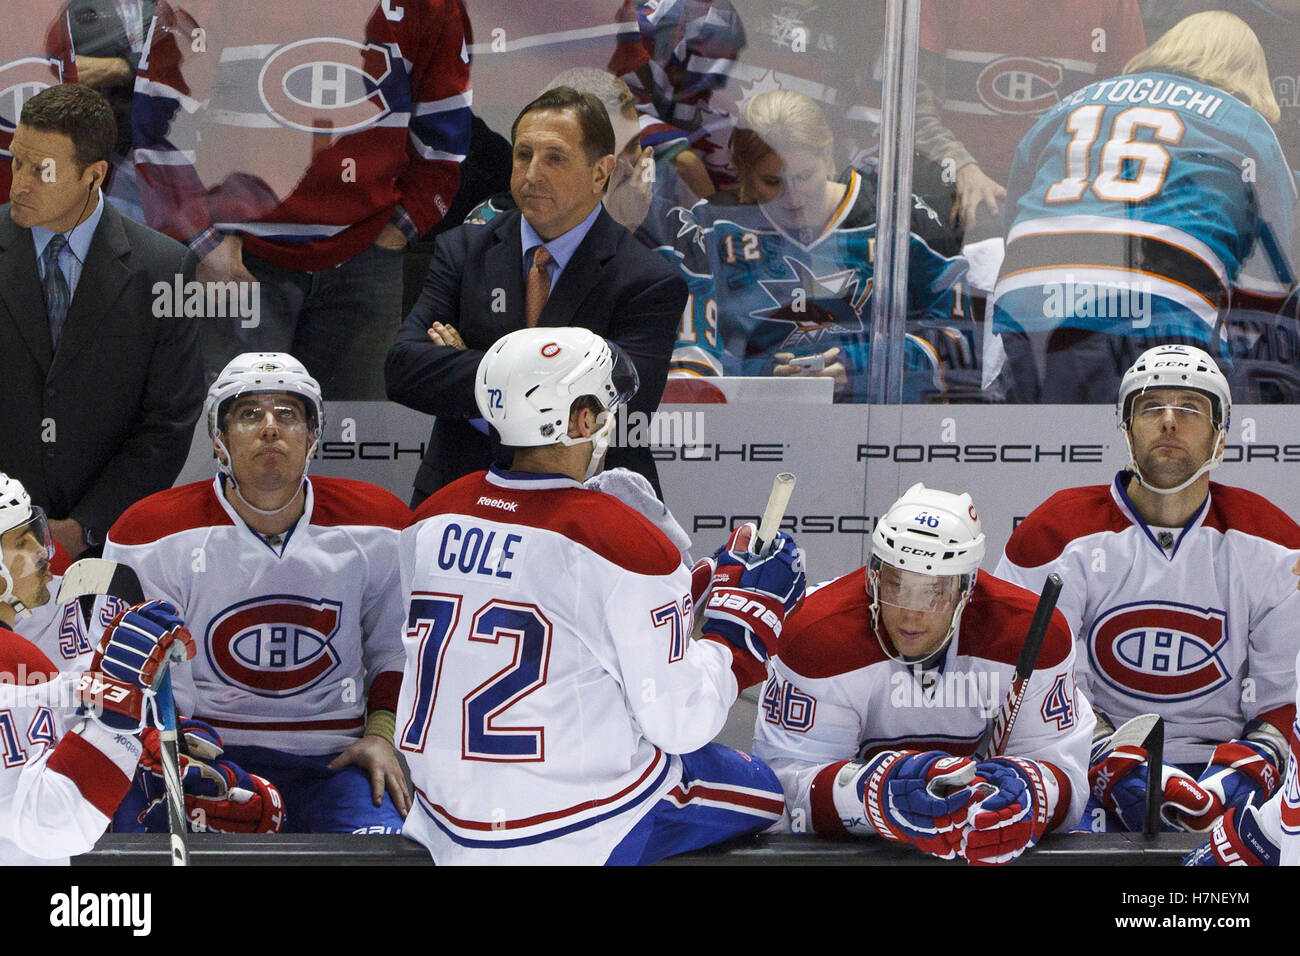 Dec 1, 2011; San Jose, CA, USA; Montreal Canadiens head coach Jacques Martin stands behind the bench during overtime against the San Jose Sharks at HP Pavilion.  San Jose defeated Montreal 4-3 in shootouts. Stock Photo